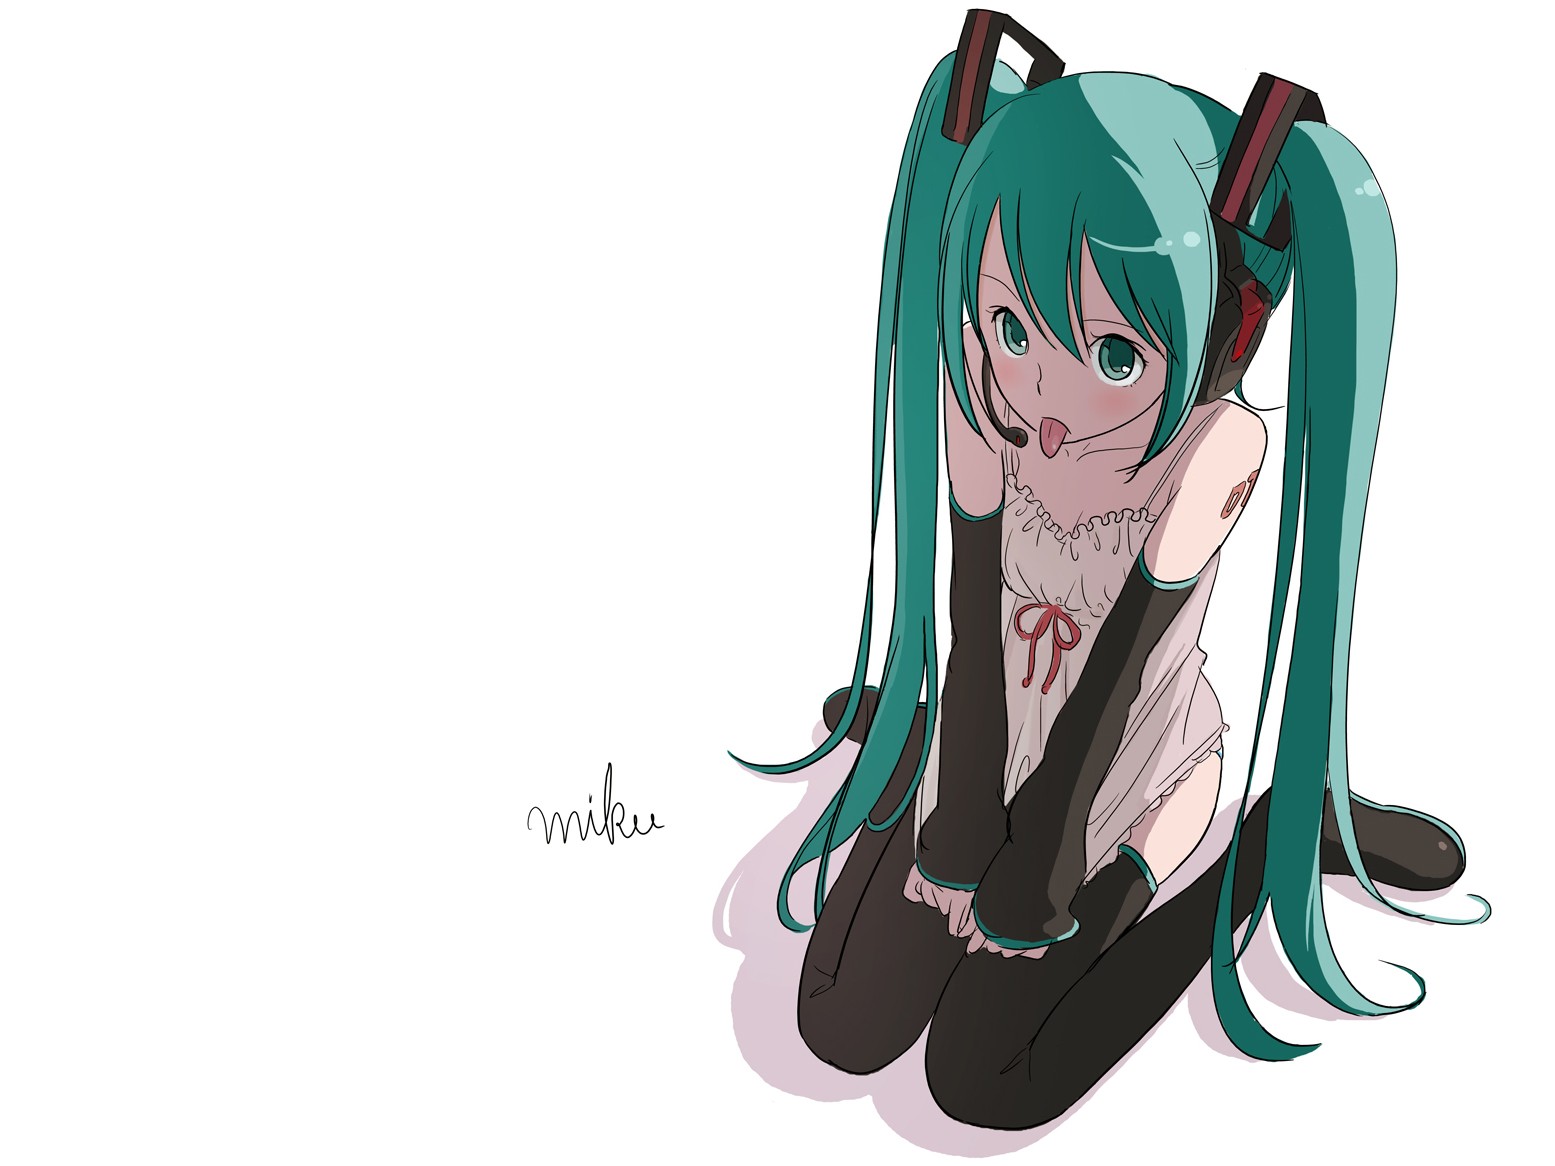 headphones, Tattoos, Vocaloid, Dress, Stockings, Hatsune, Miku, Long, Hair, Tongue, Green, Eyes, Thigh, Highs, Green, Hair, Twintails, Sitting, White, Dress, Simple, Background, Anime, Girls, Simple, Detached, S Wallpaper